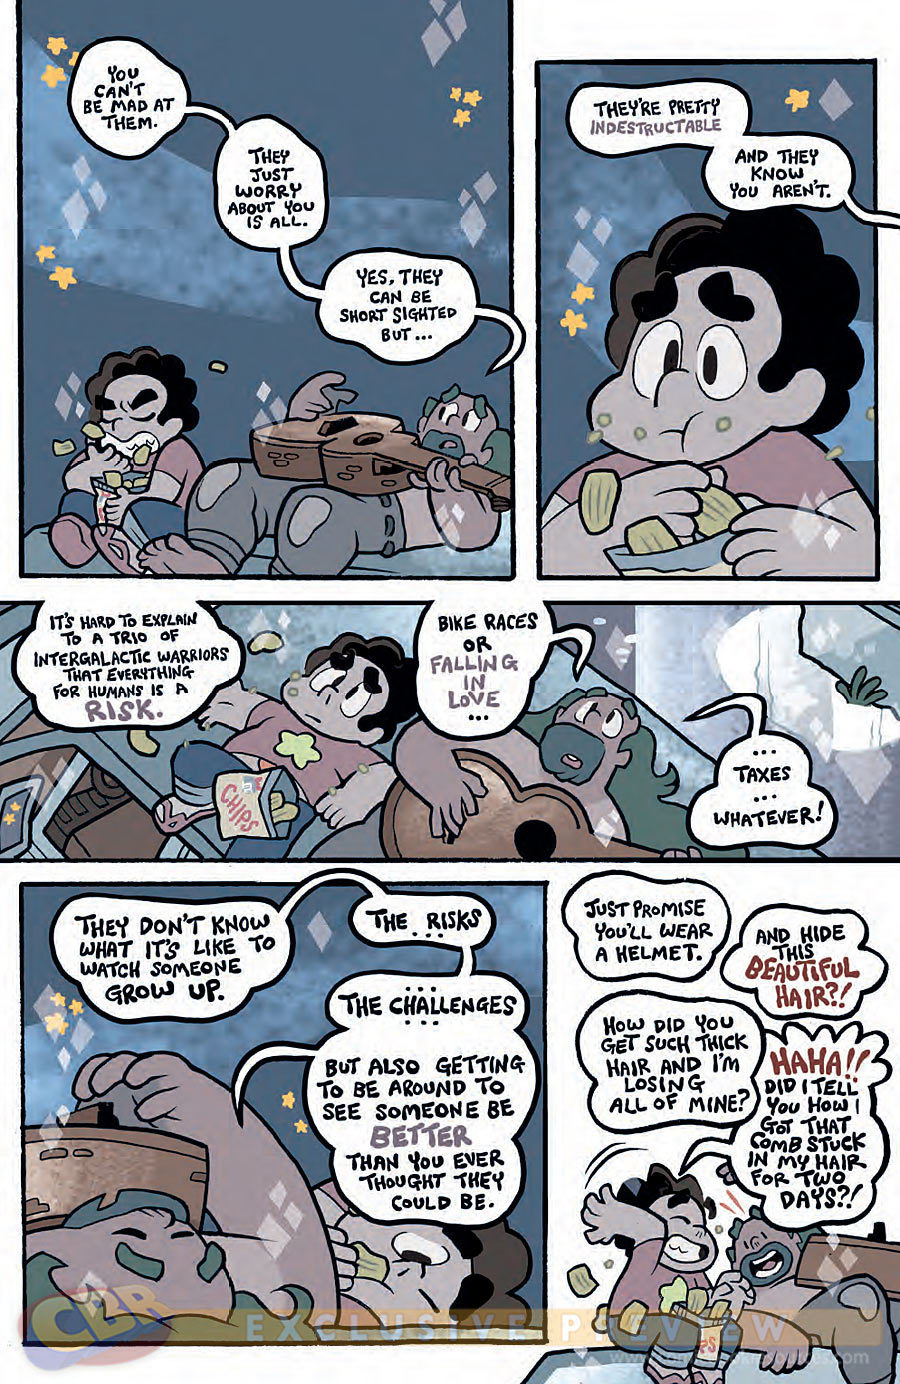 From the artist of the SU Comic, Coleman Engle:  CBR put up a preview for issue 2!